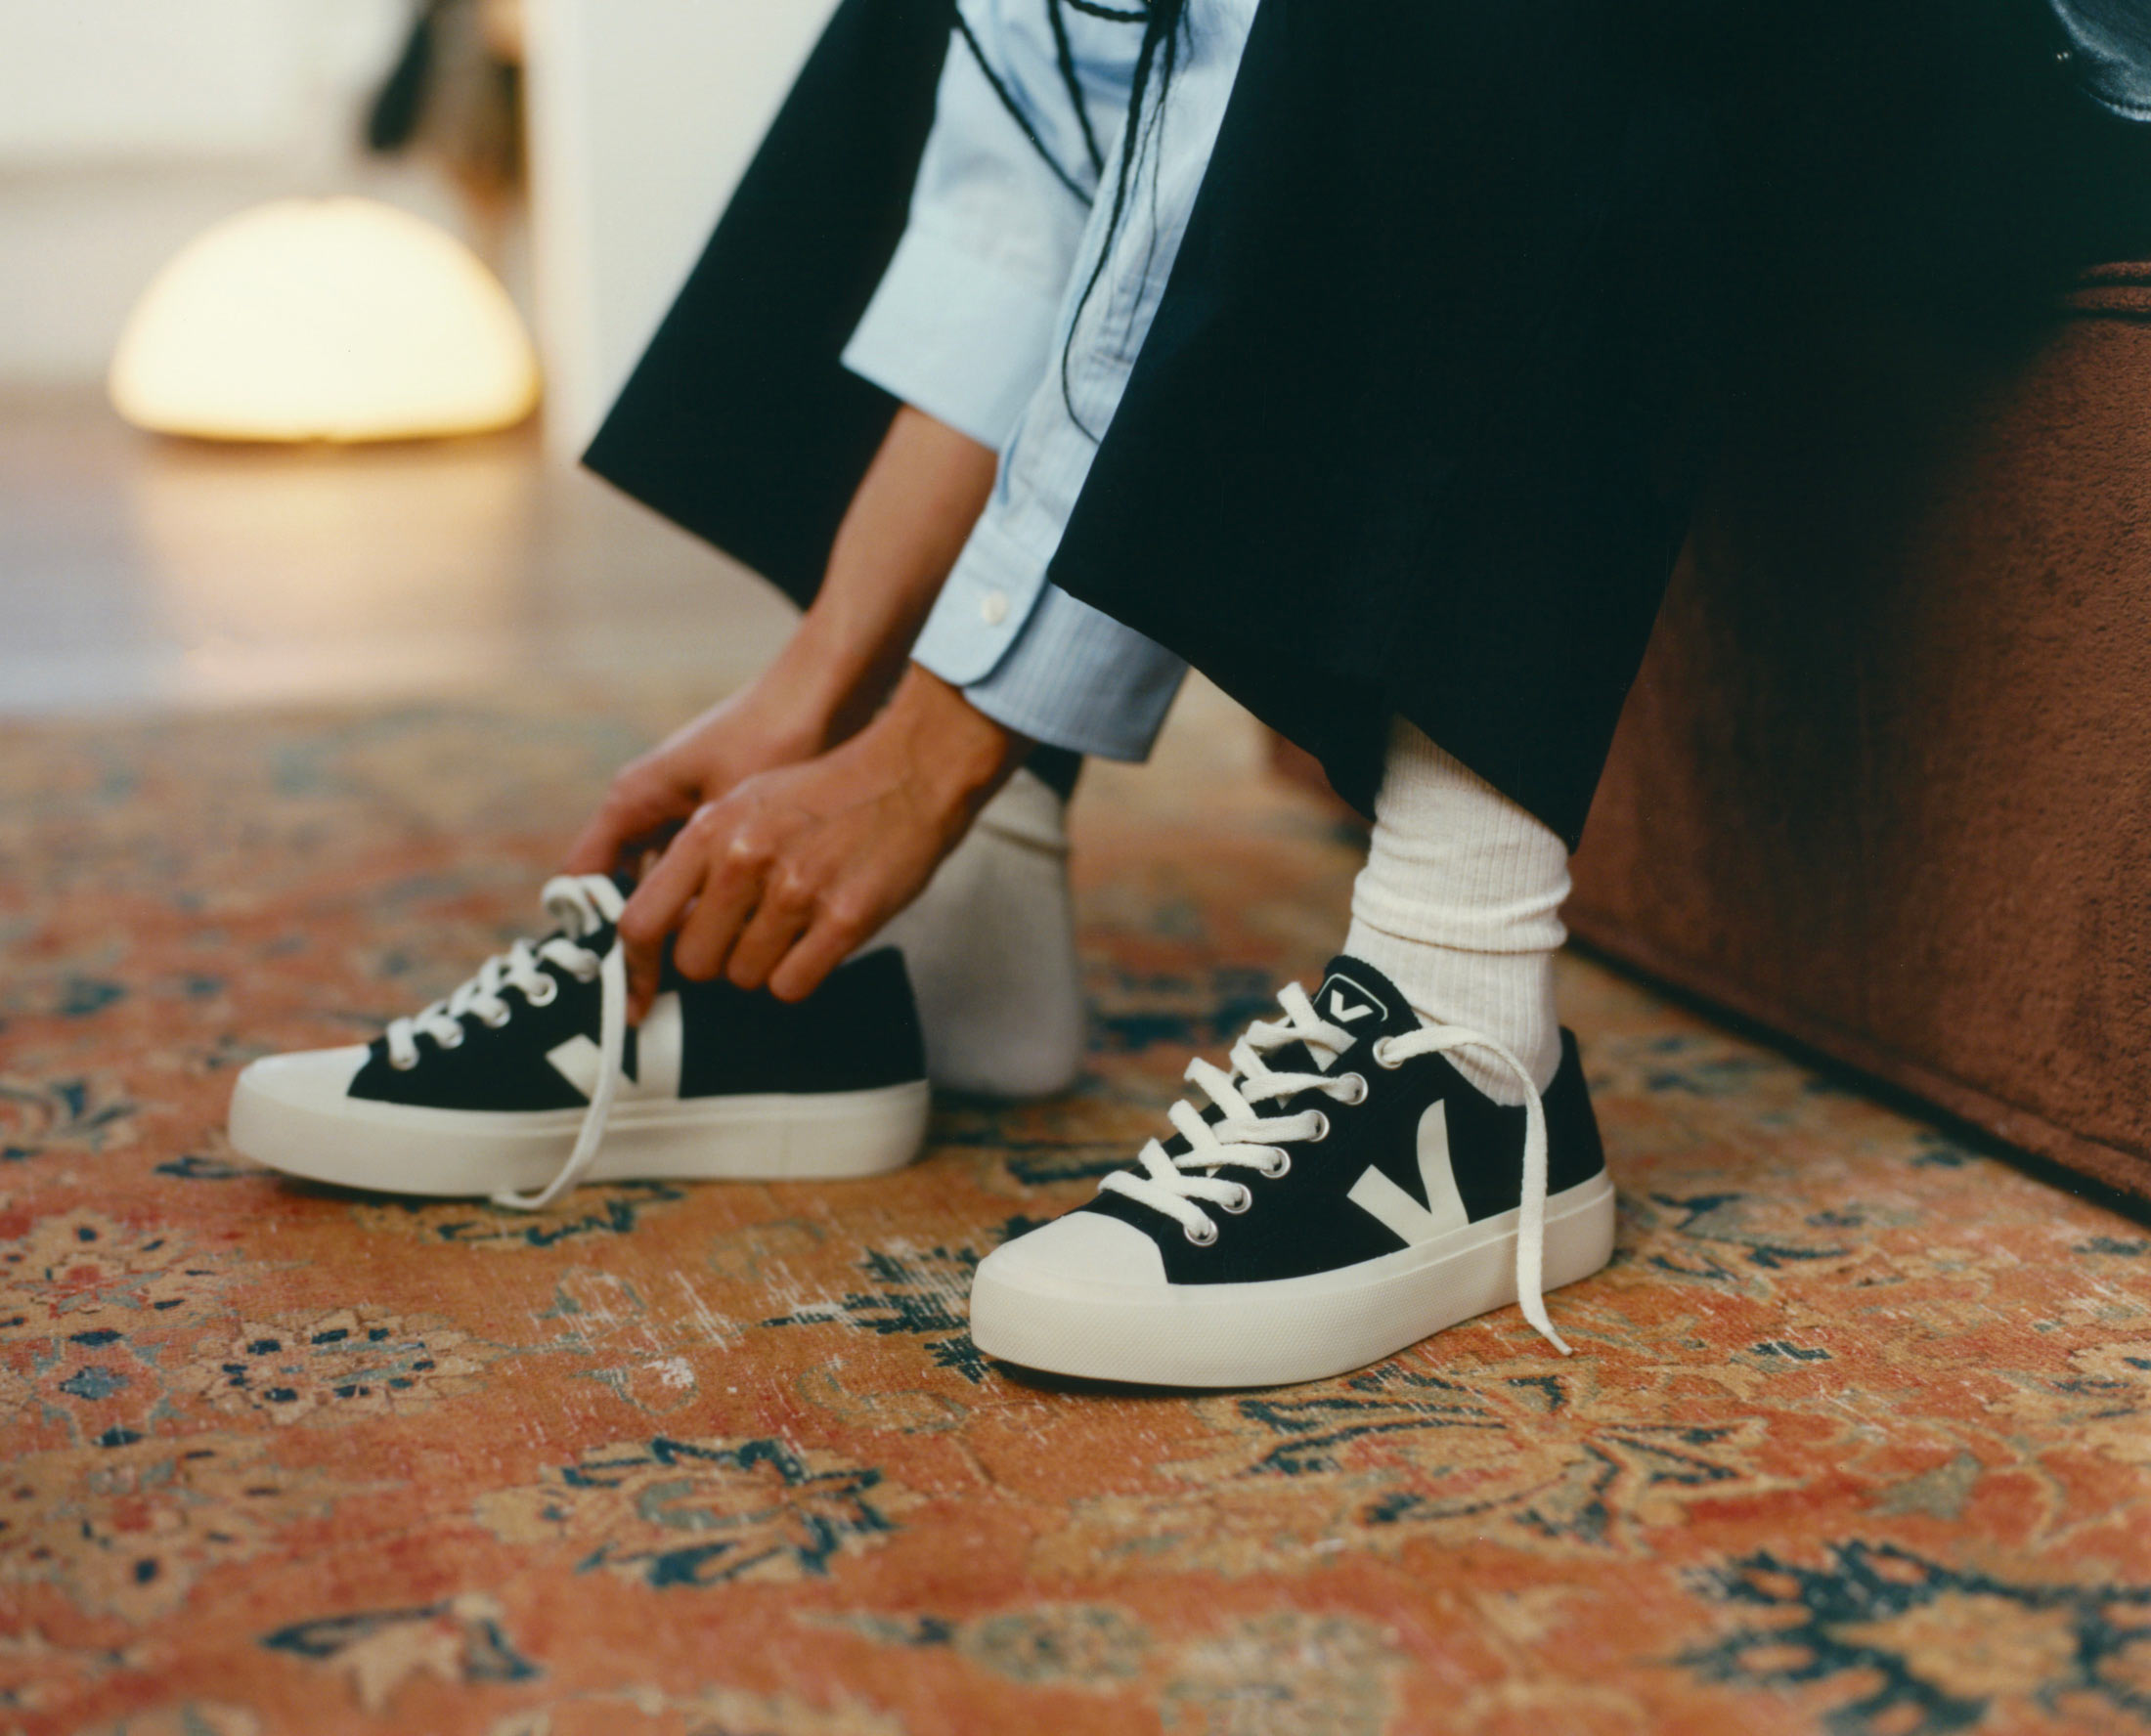 How Veja Strives to Make the Greenest Sneakers - Bloomberg